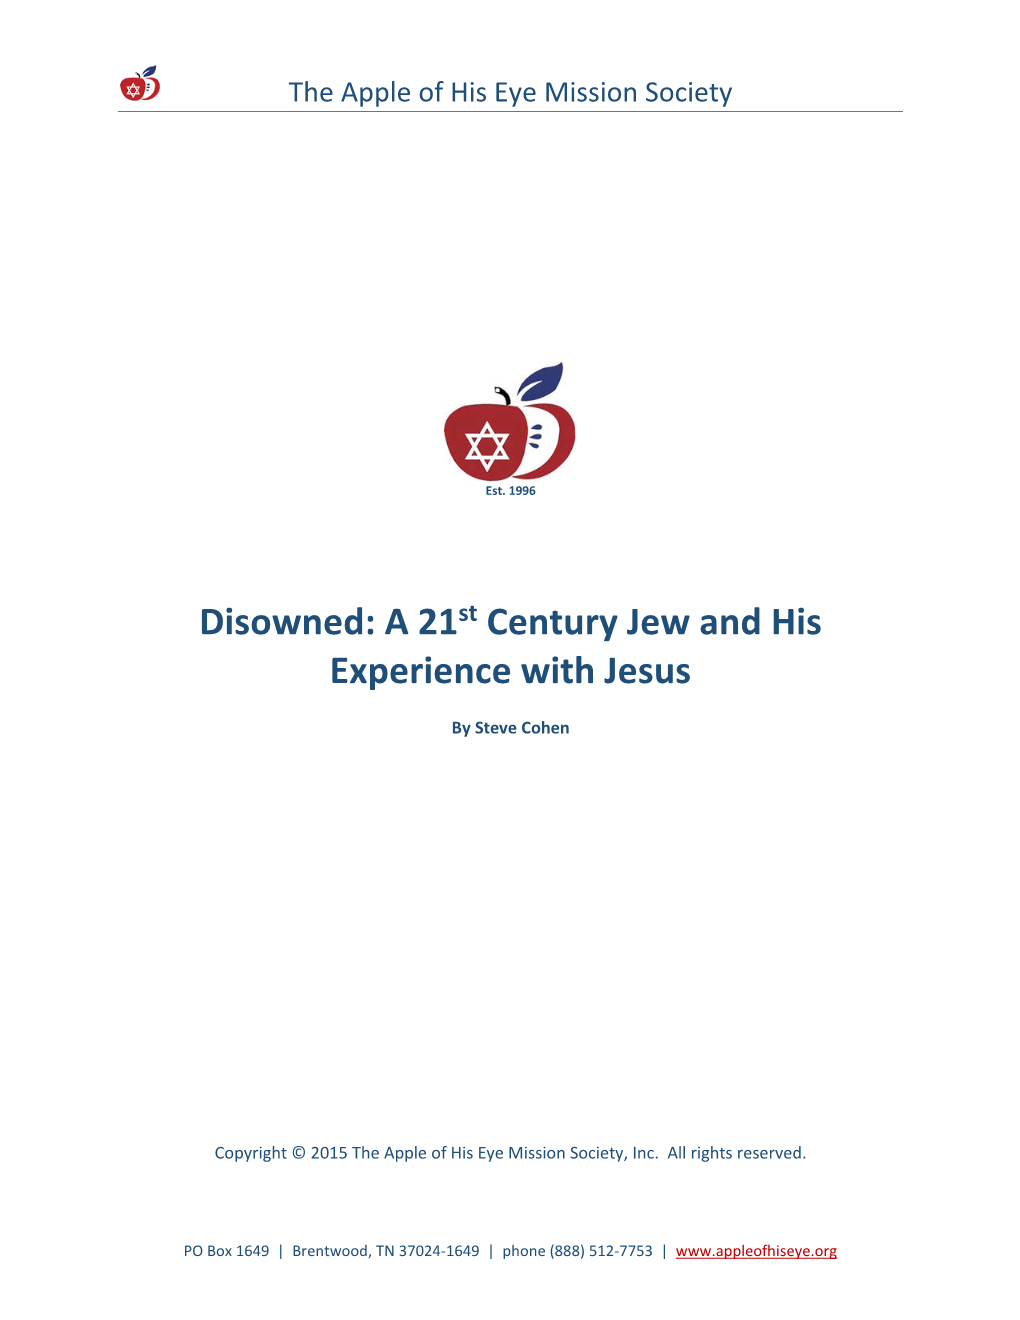 Disowned: a 21St Century Jew and His Experience with Jesus